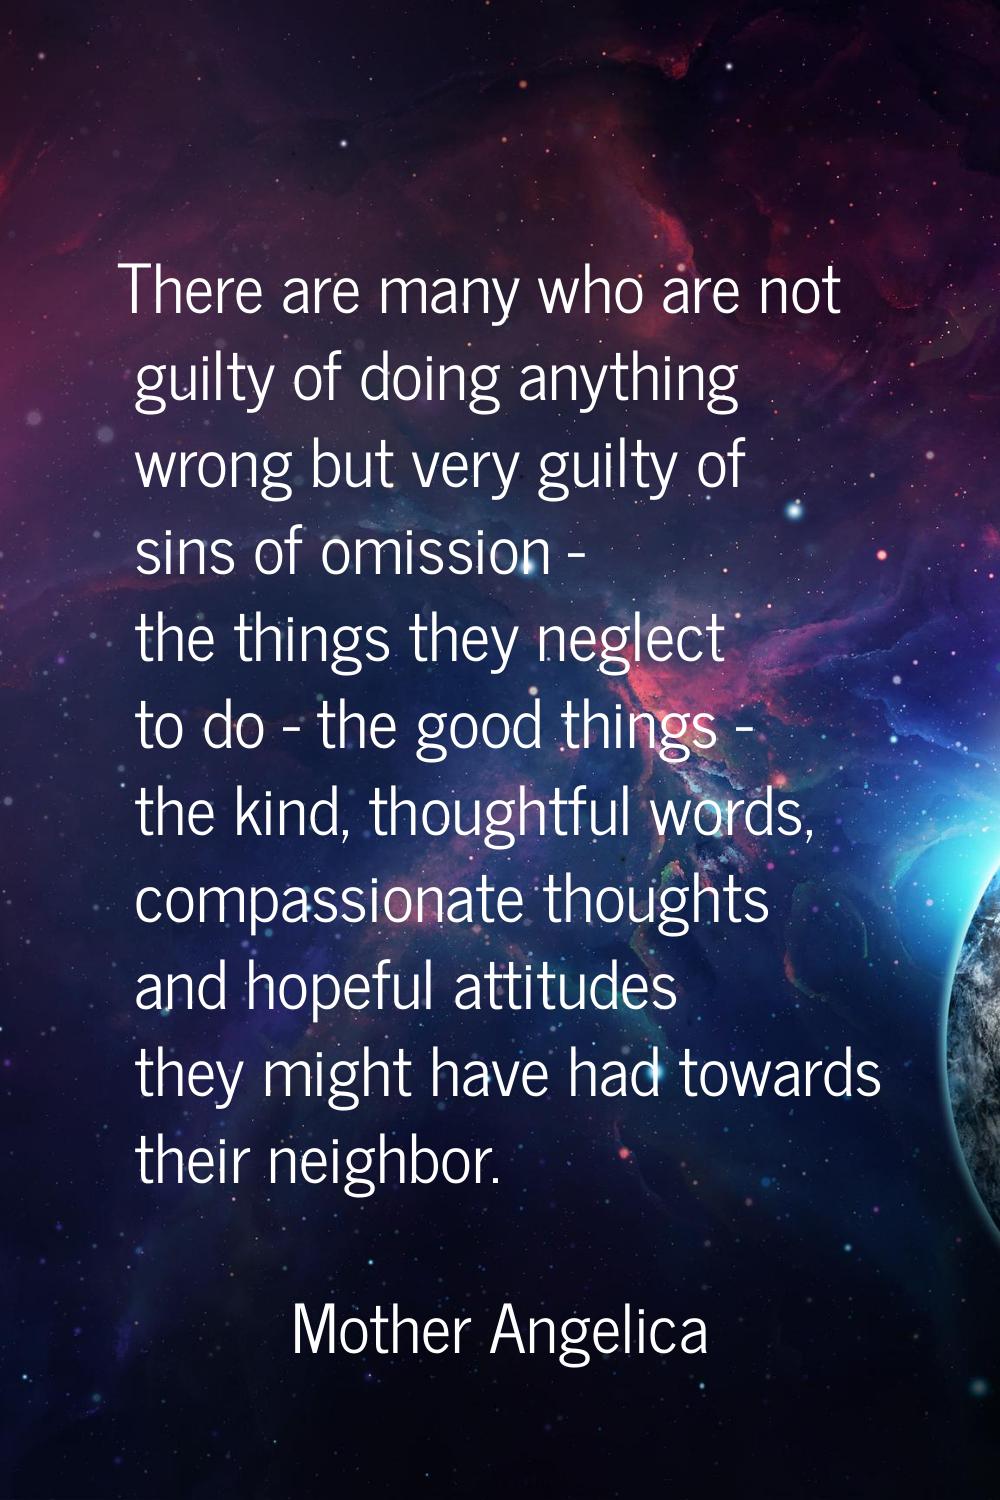 There are many who are not guilty of doing anything wrong but very guilty of sins of omission - the